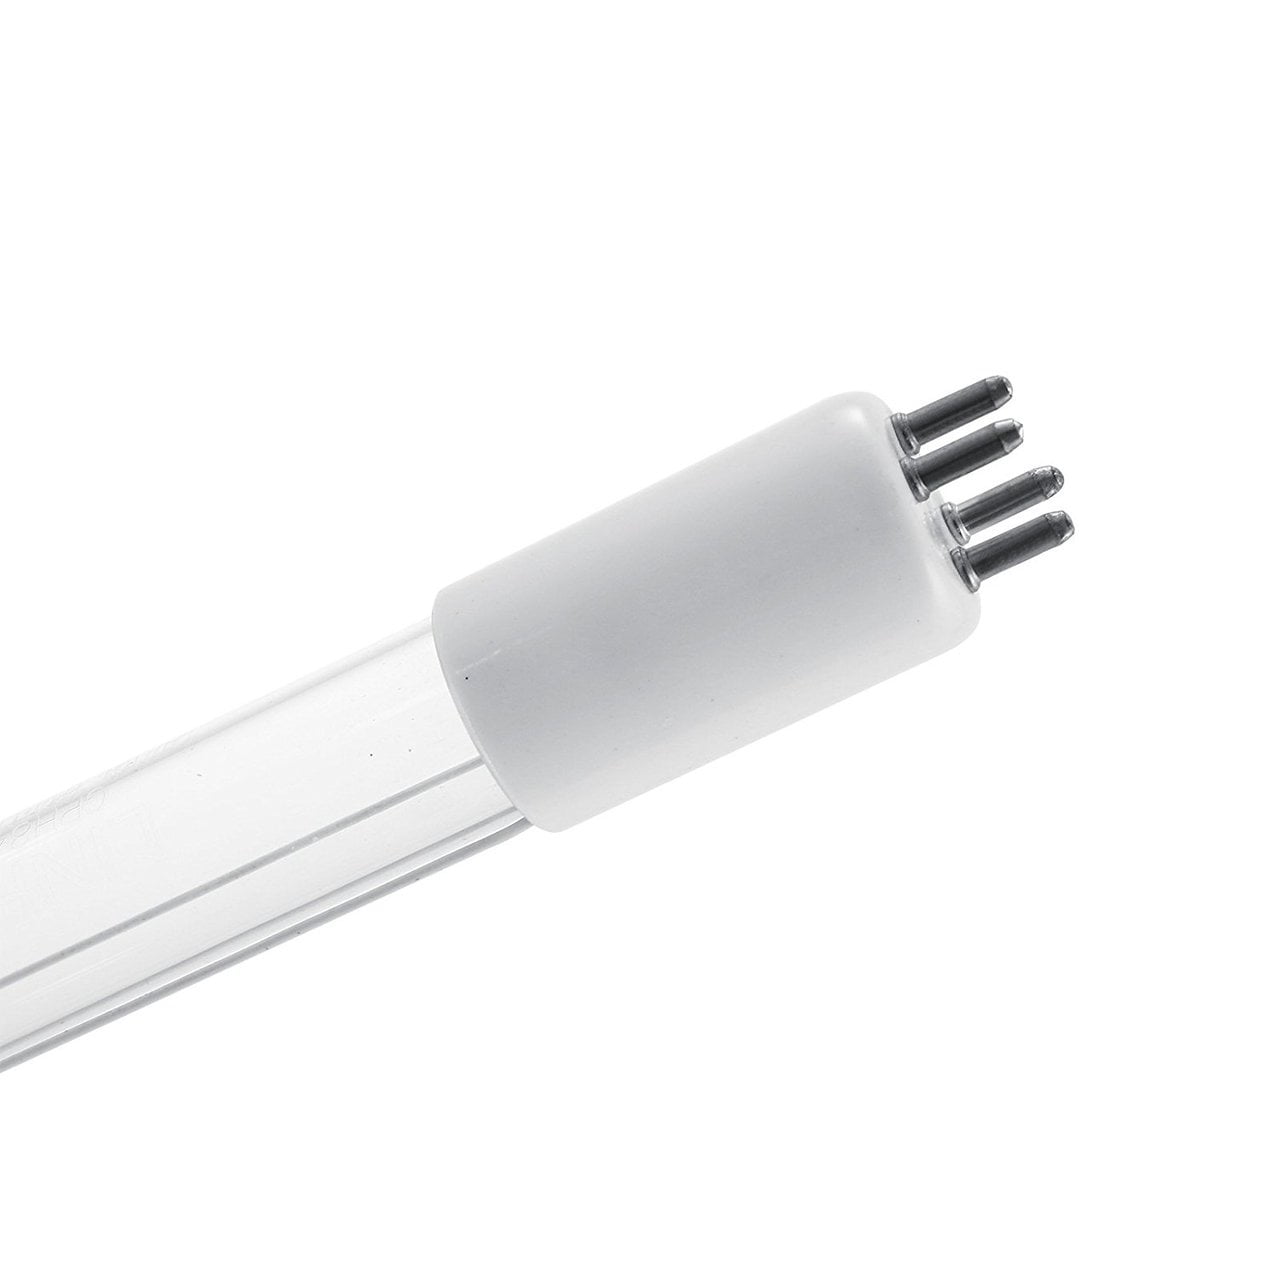 LSE Lighting compatible UV Lamp S2RL for S2R S2RA systems 